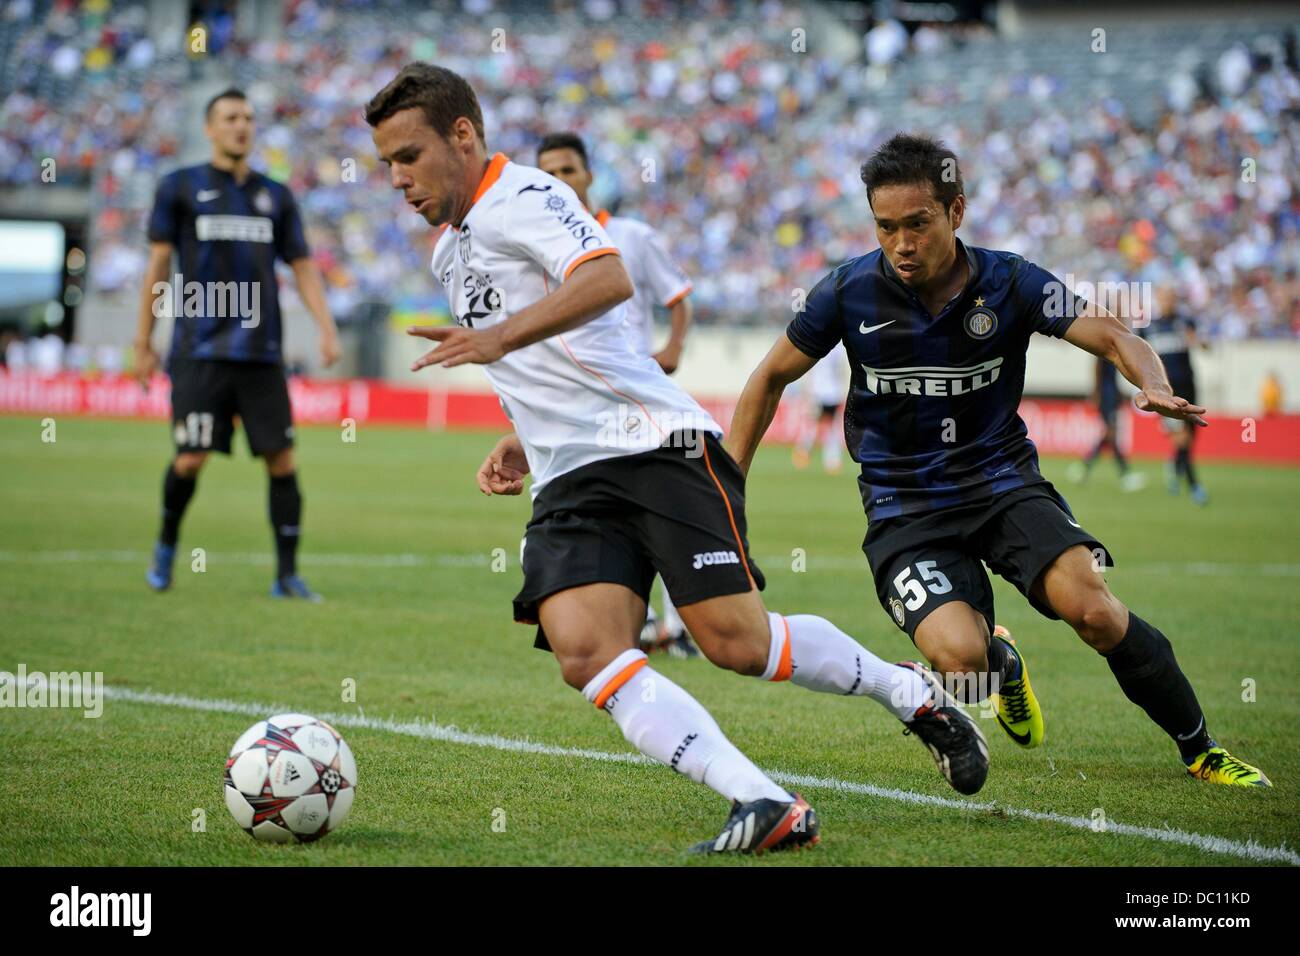 East Rutherford, New Jersey, USA. 4th Aug, 2013. August 04, 2013: Valencia midfielder Juan Bernat (14)looks to clear the ball away from Internazionale defender Yuto Nagatomo (55) during the Guinness International Champions Cup match between Valencia C.F. and Inter Milan at Met Life Stadium, East Rutherford, NJ. Valencia defeated Internazionale 4-0. © csm/Alamy Live News Stock Photo